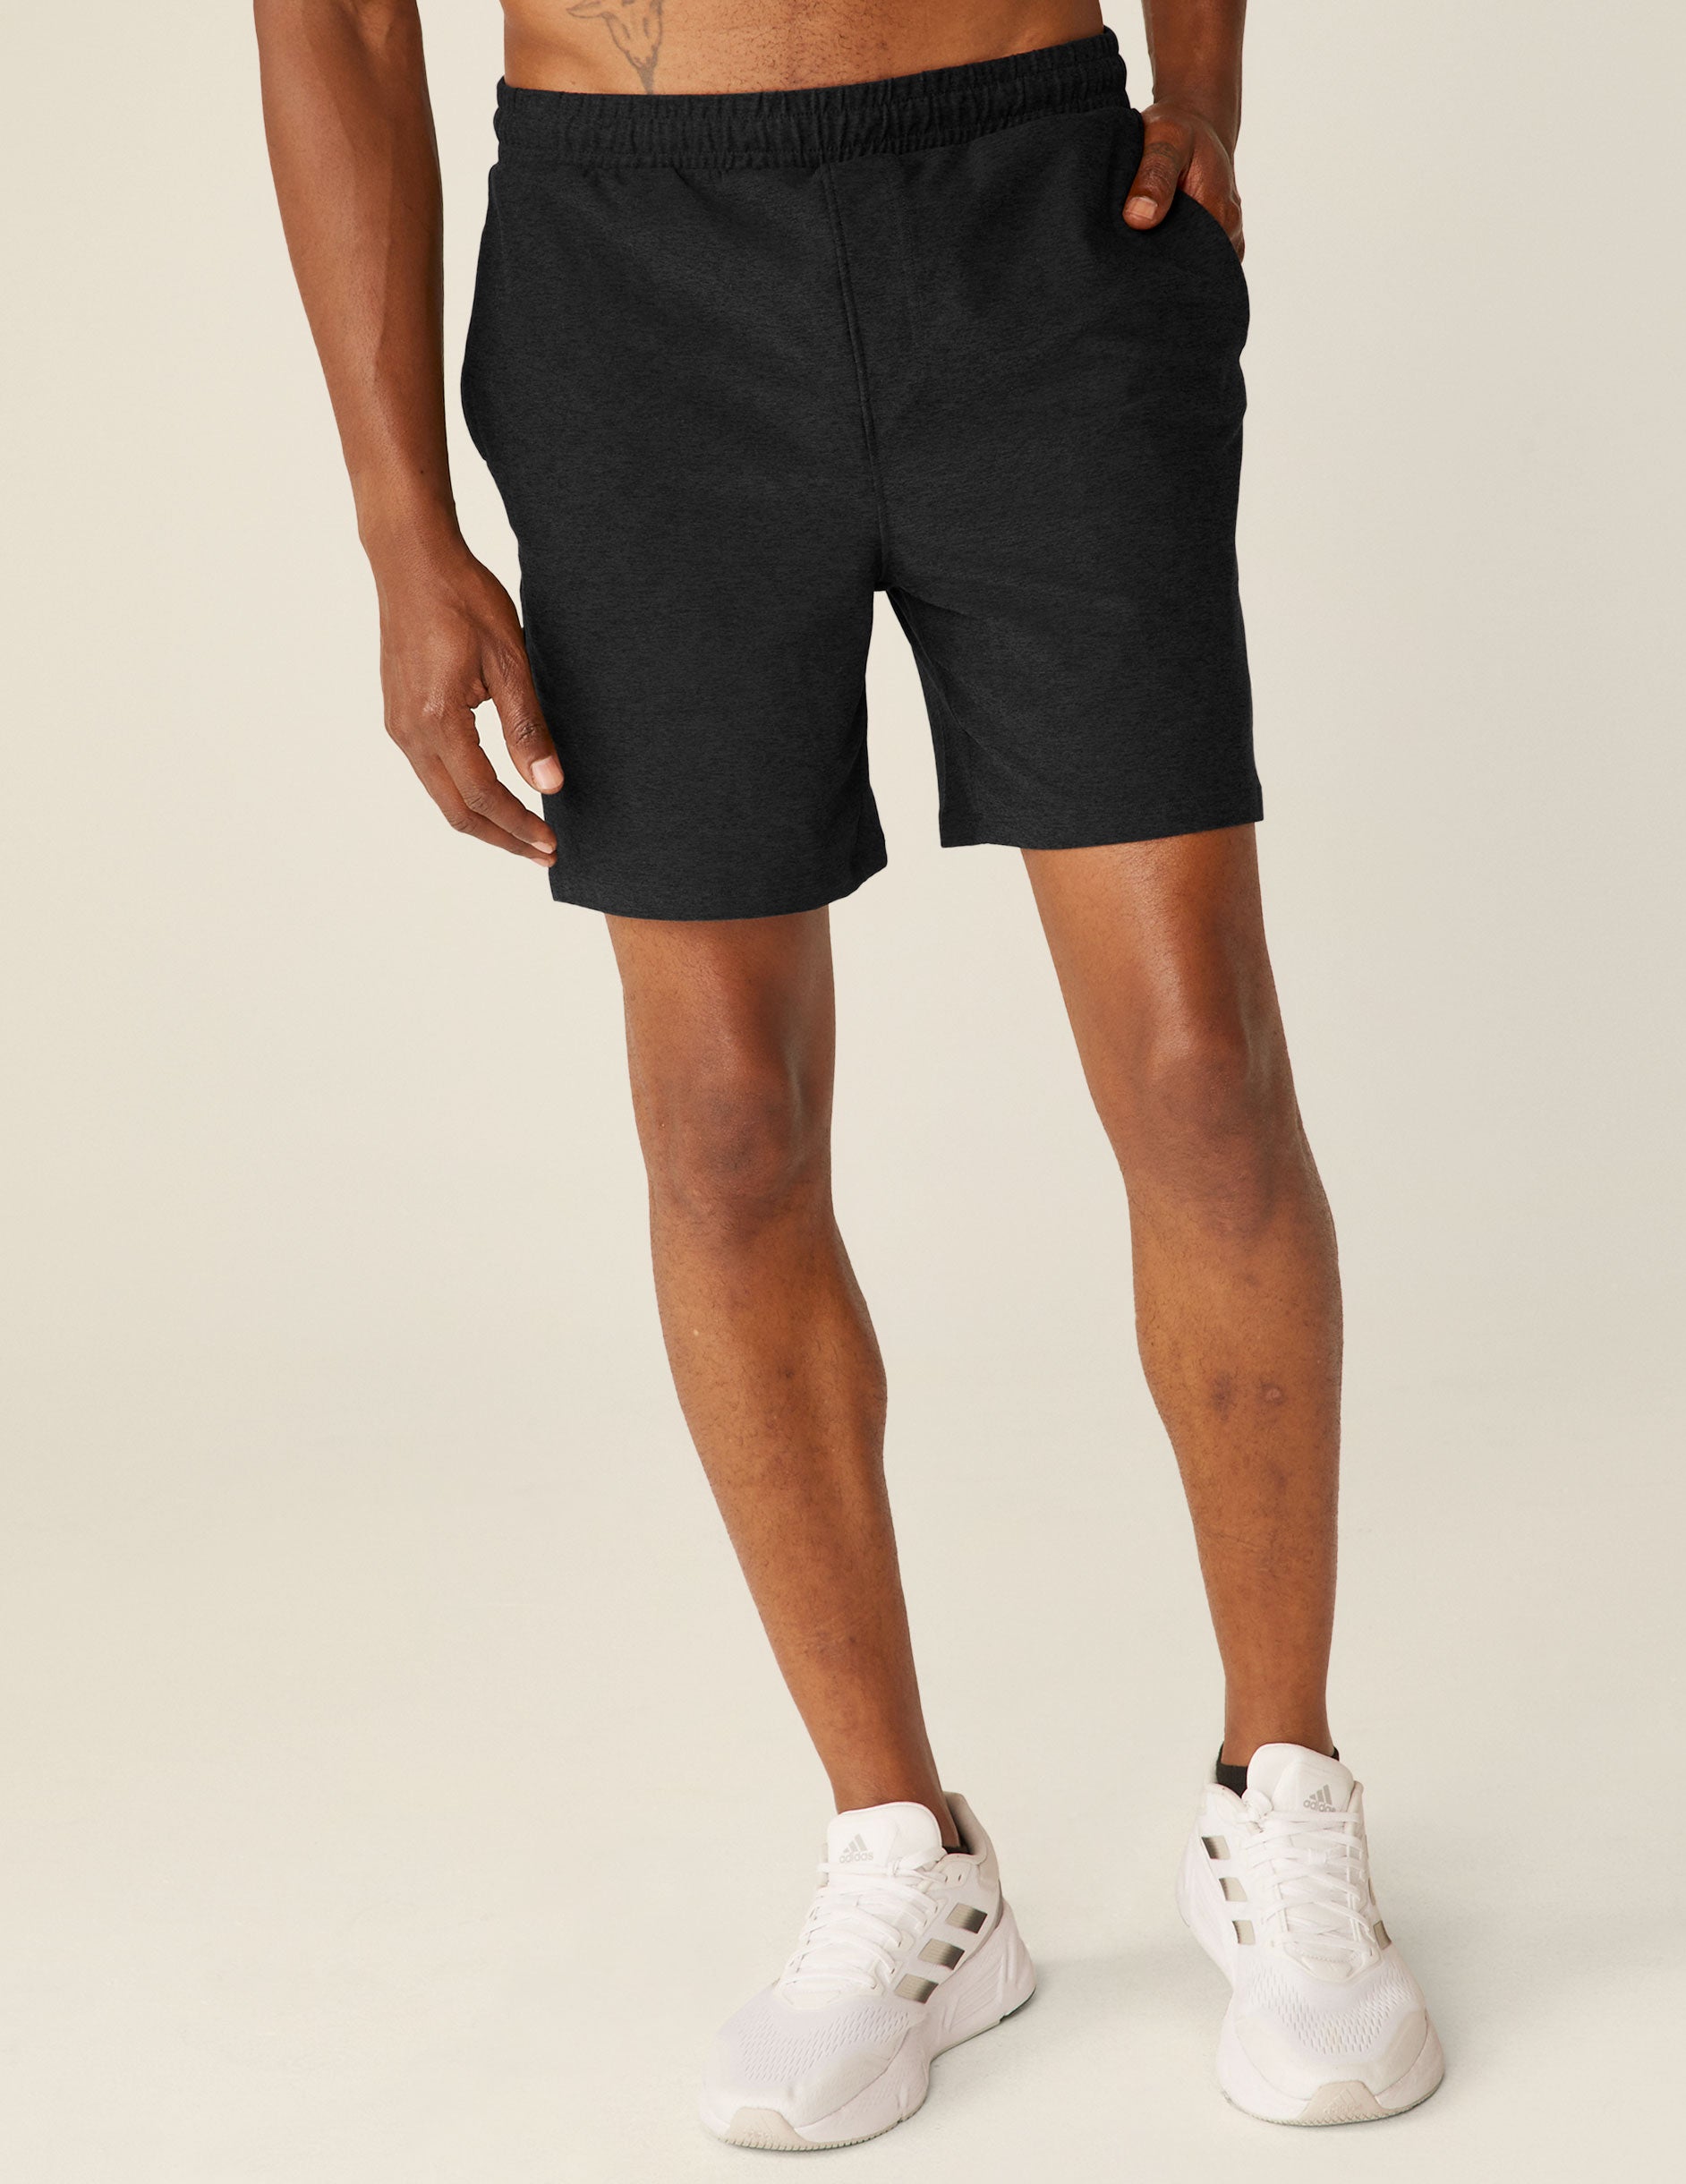 black relaxed fit men's athleisure shorts with pockets.